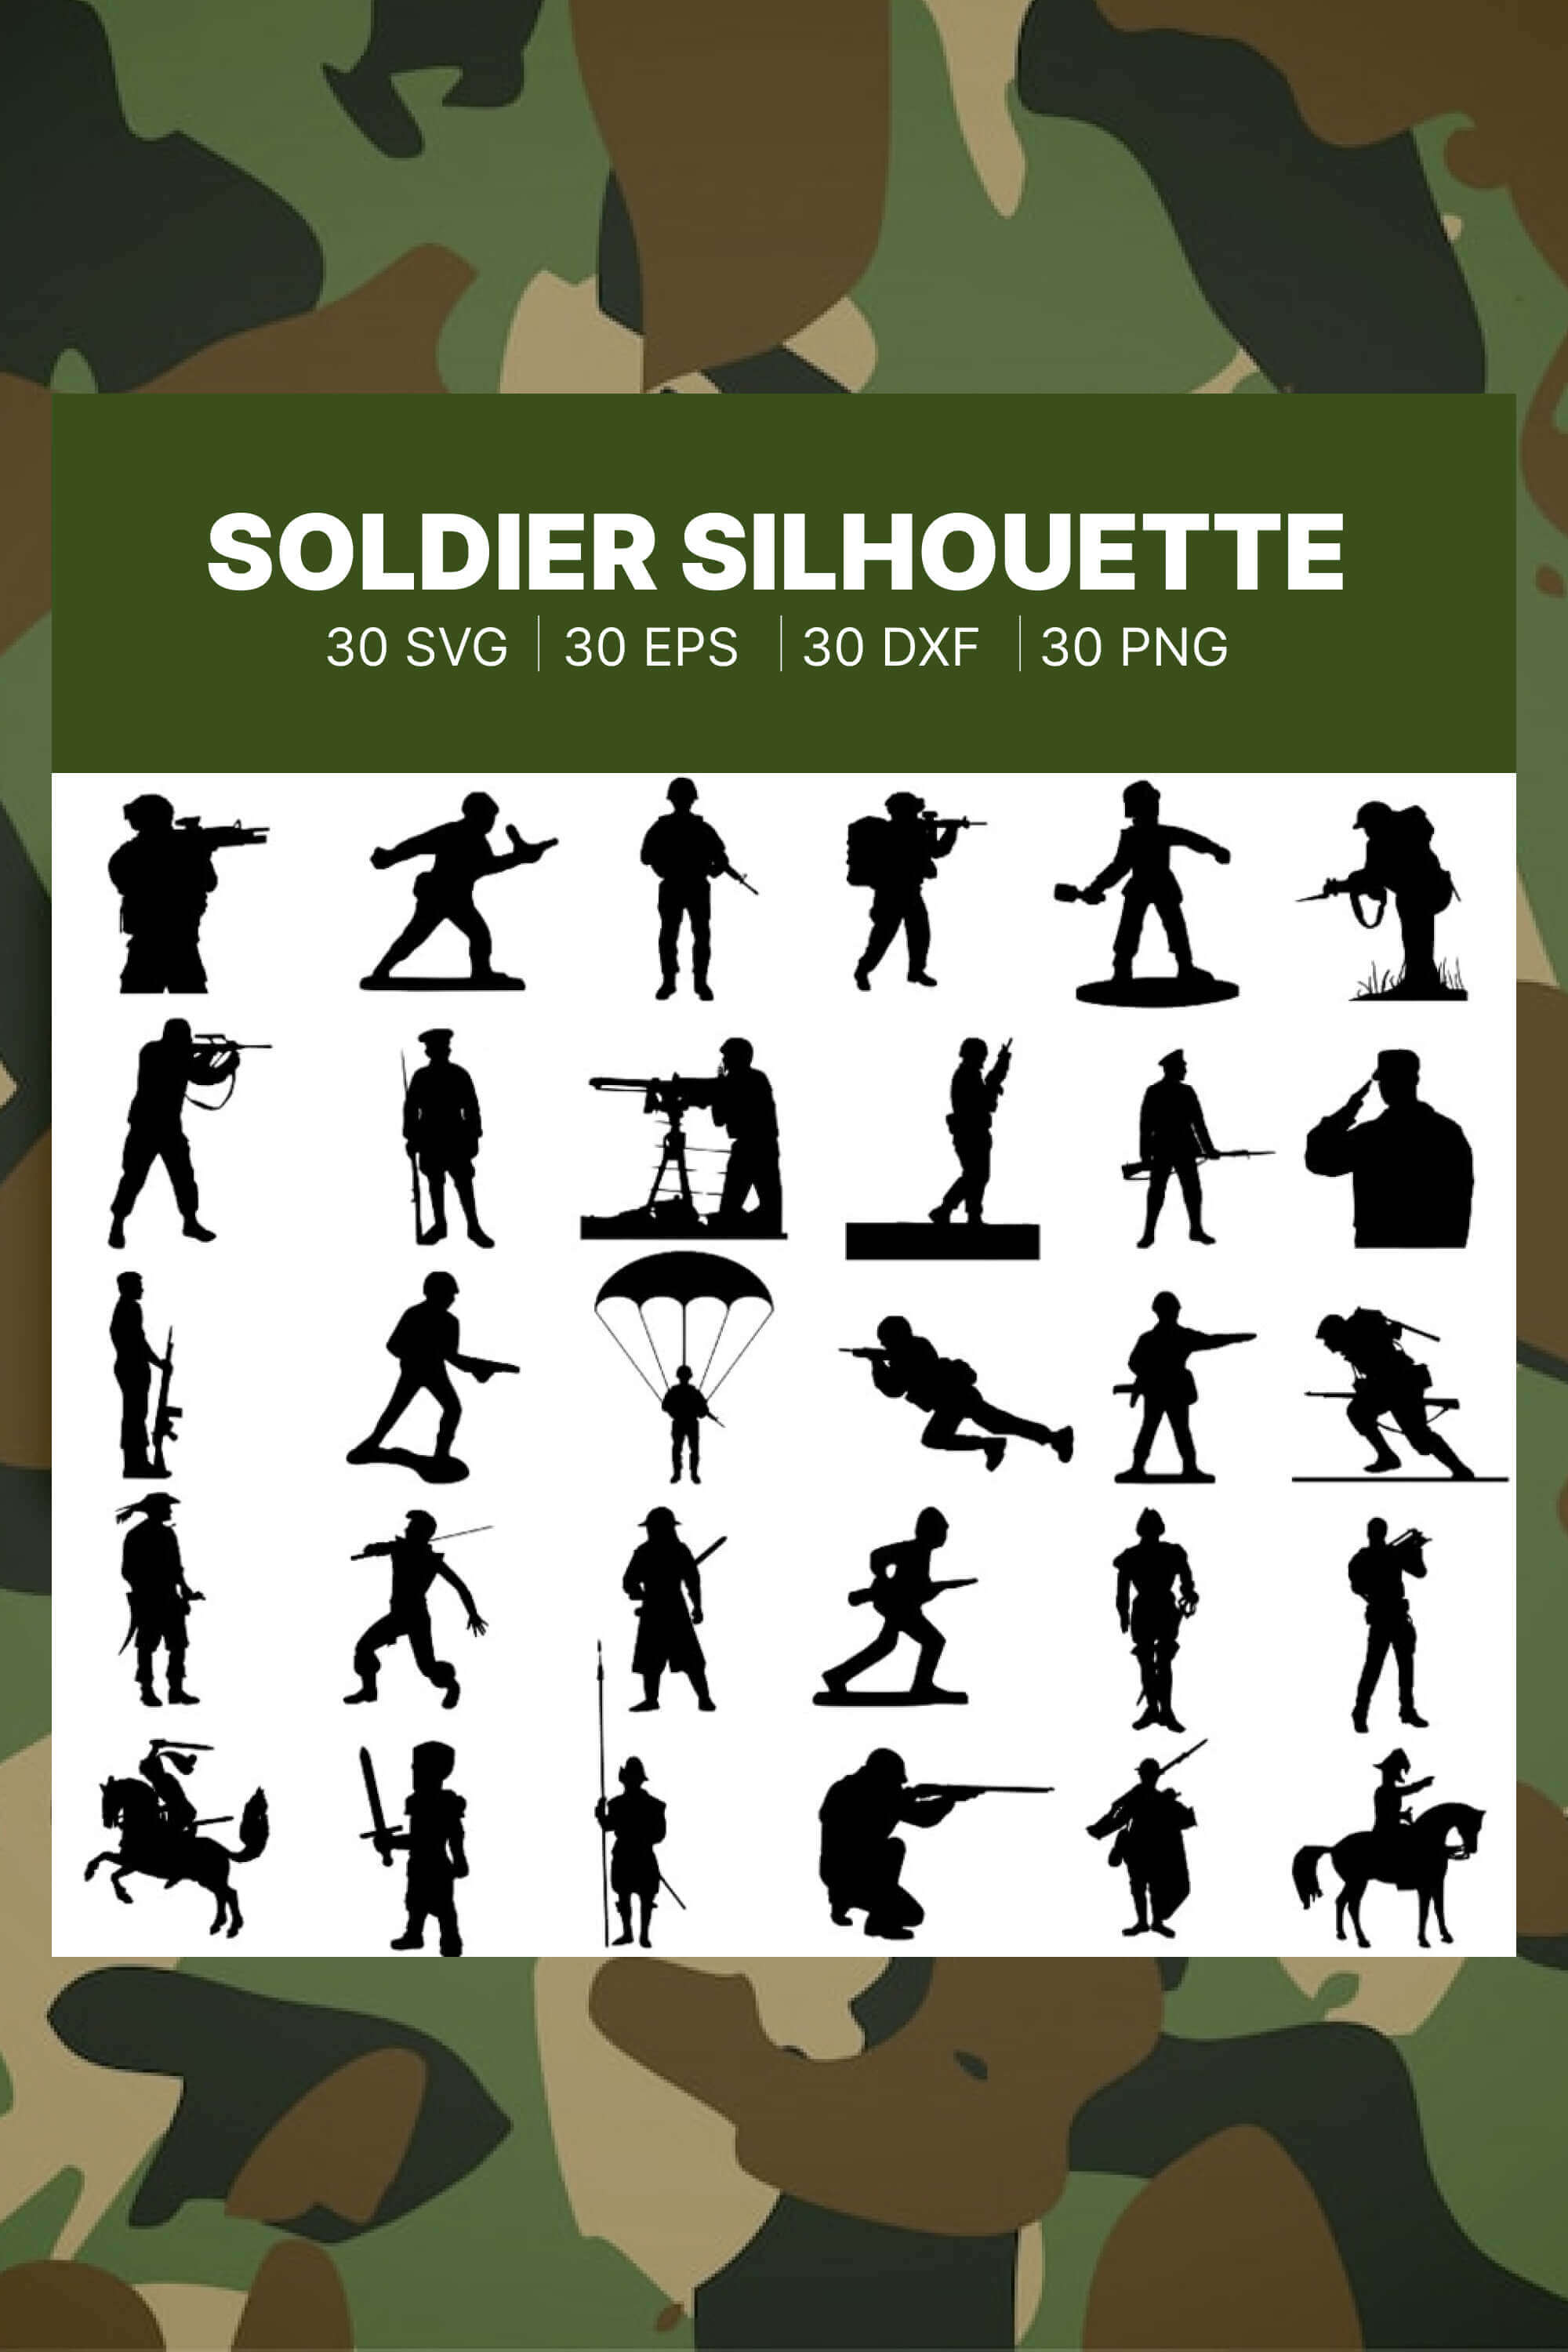 Silhouettes of soldiers with a parachute, weapons and means of transportation.